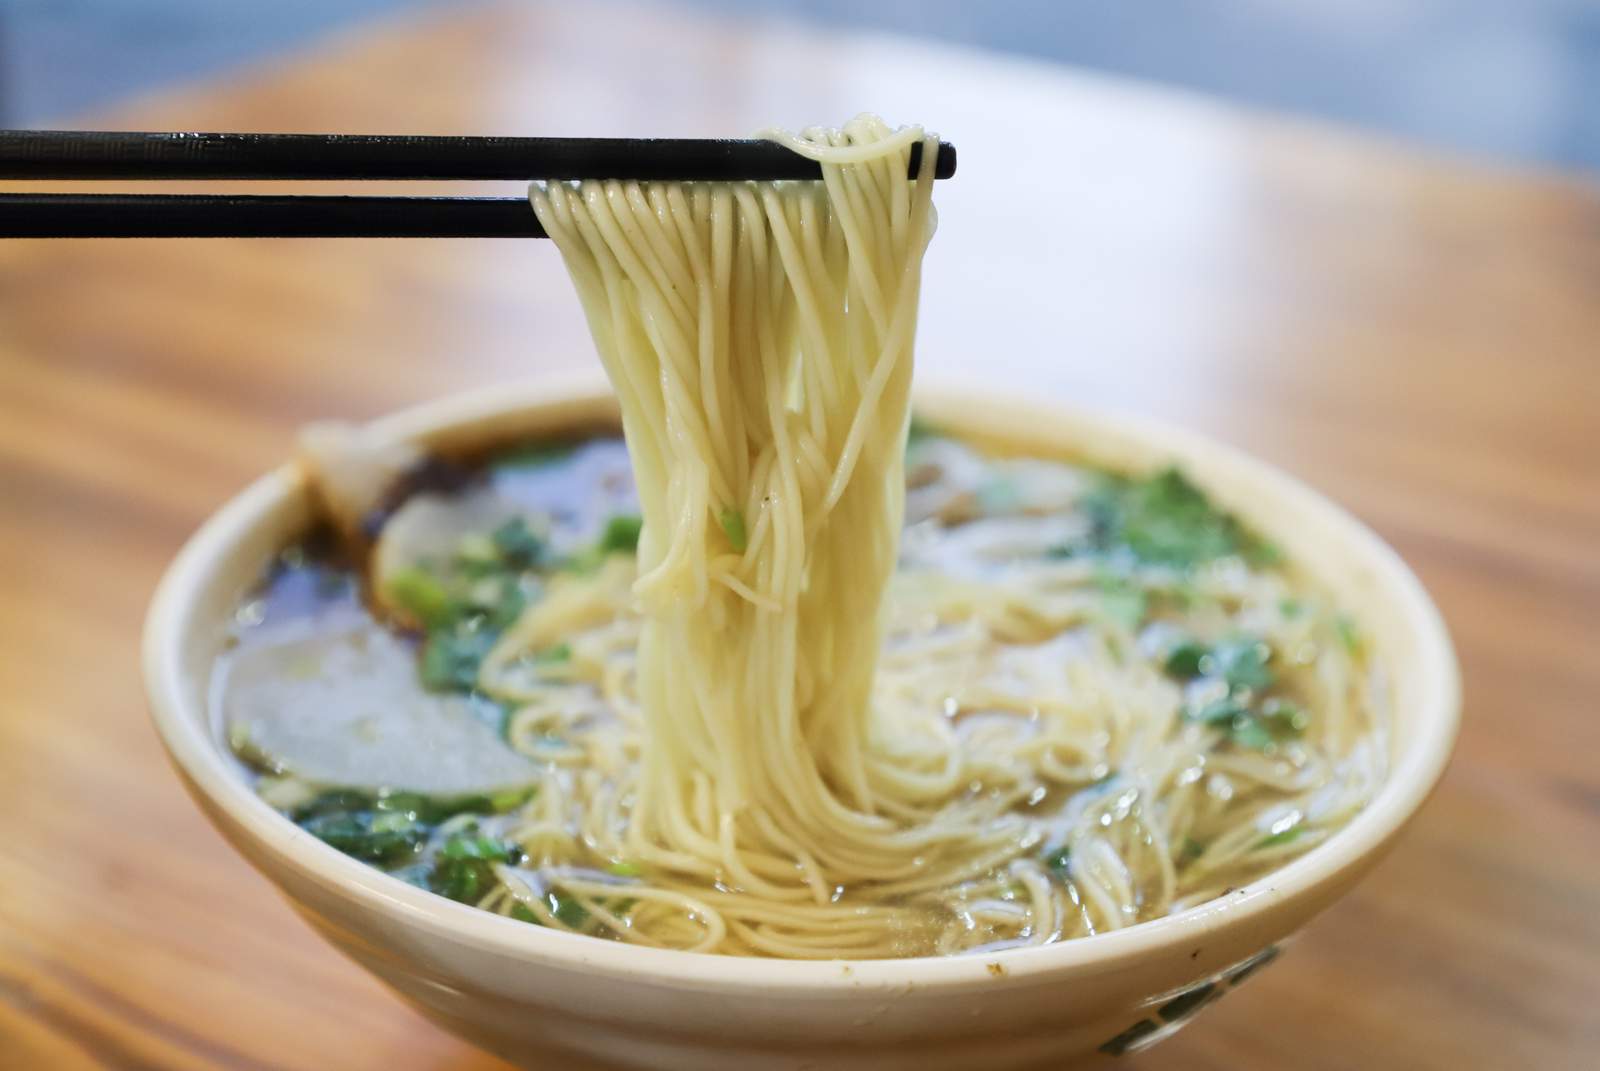 Soup-er Tuesday: This French onion beef noodle soup has the most slurp-worthy broth of all time